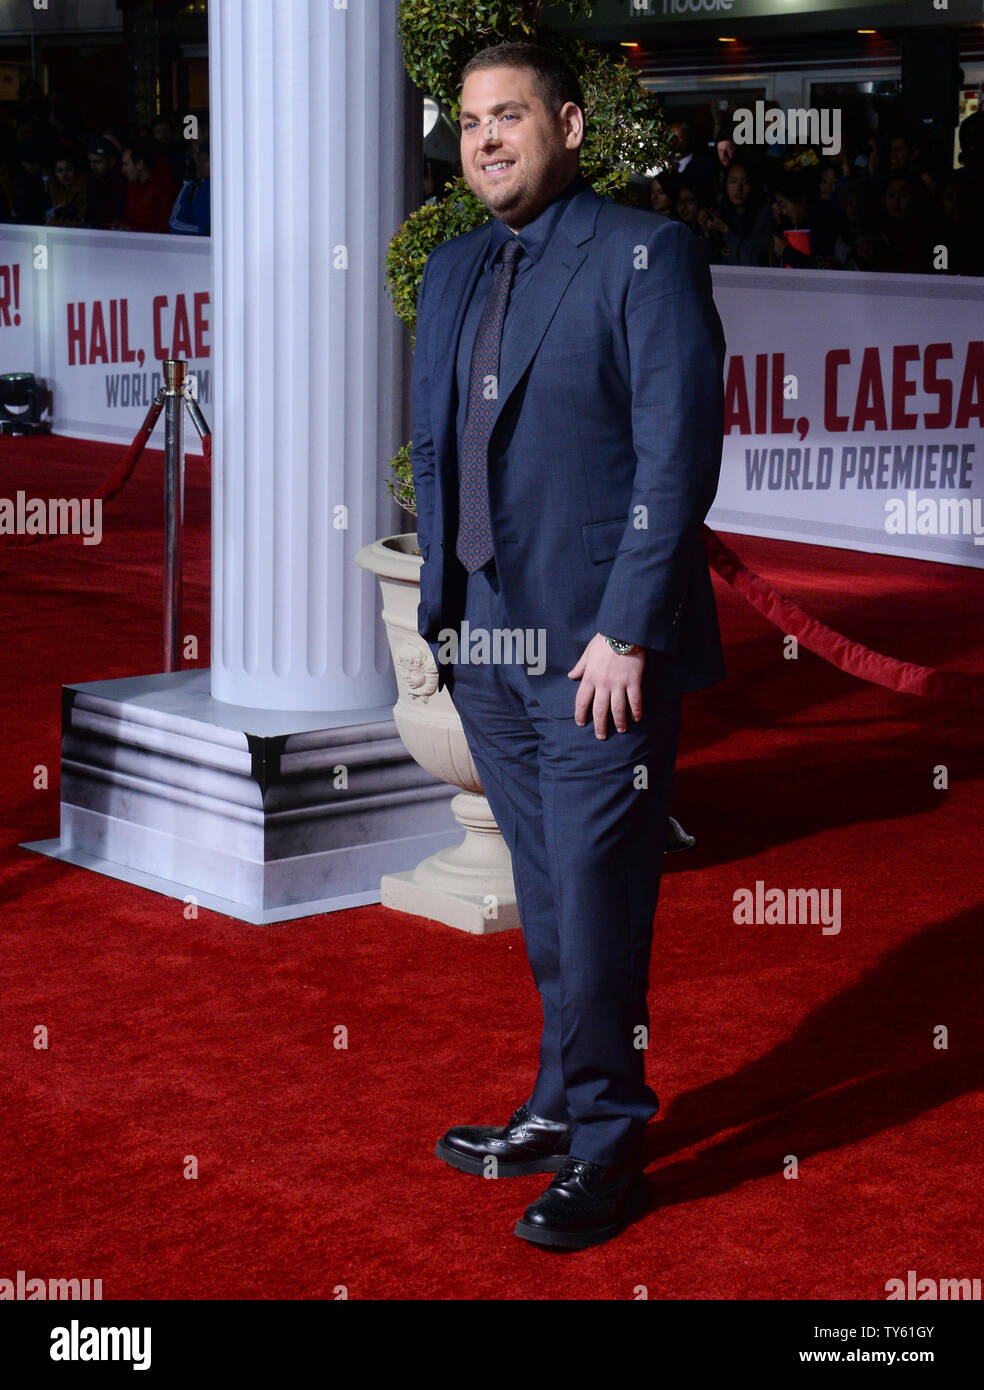 Cast member Jonah Hill attends the 'Hail, Caesar!' premiere at the Regency Village Theatre in the Westwood section of Los Angeles on February 1, 2016. Storyline: Hail Caesar! follows a day in the life of Eddie Mannix, a Hollywood fixer for Capital Pictures in the 1950s, who cleans up and solves problems for big names and stars in the industry. But when studio star Baird Whitlock disappears, Mannix has to deal with more than just the fix.   Photo by Jim Ruymen/UPI Stock Photo